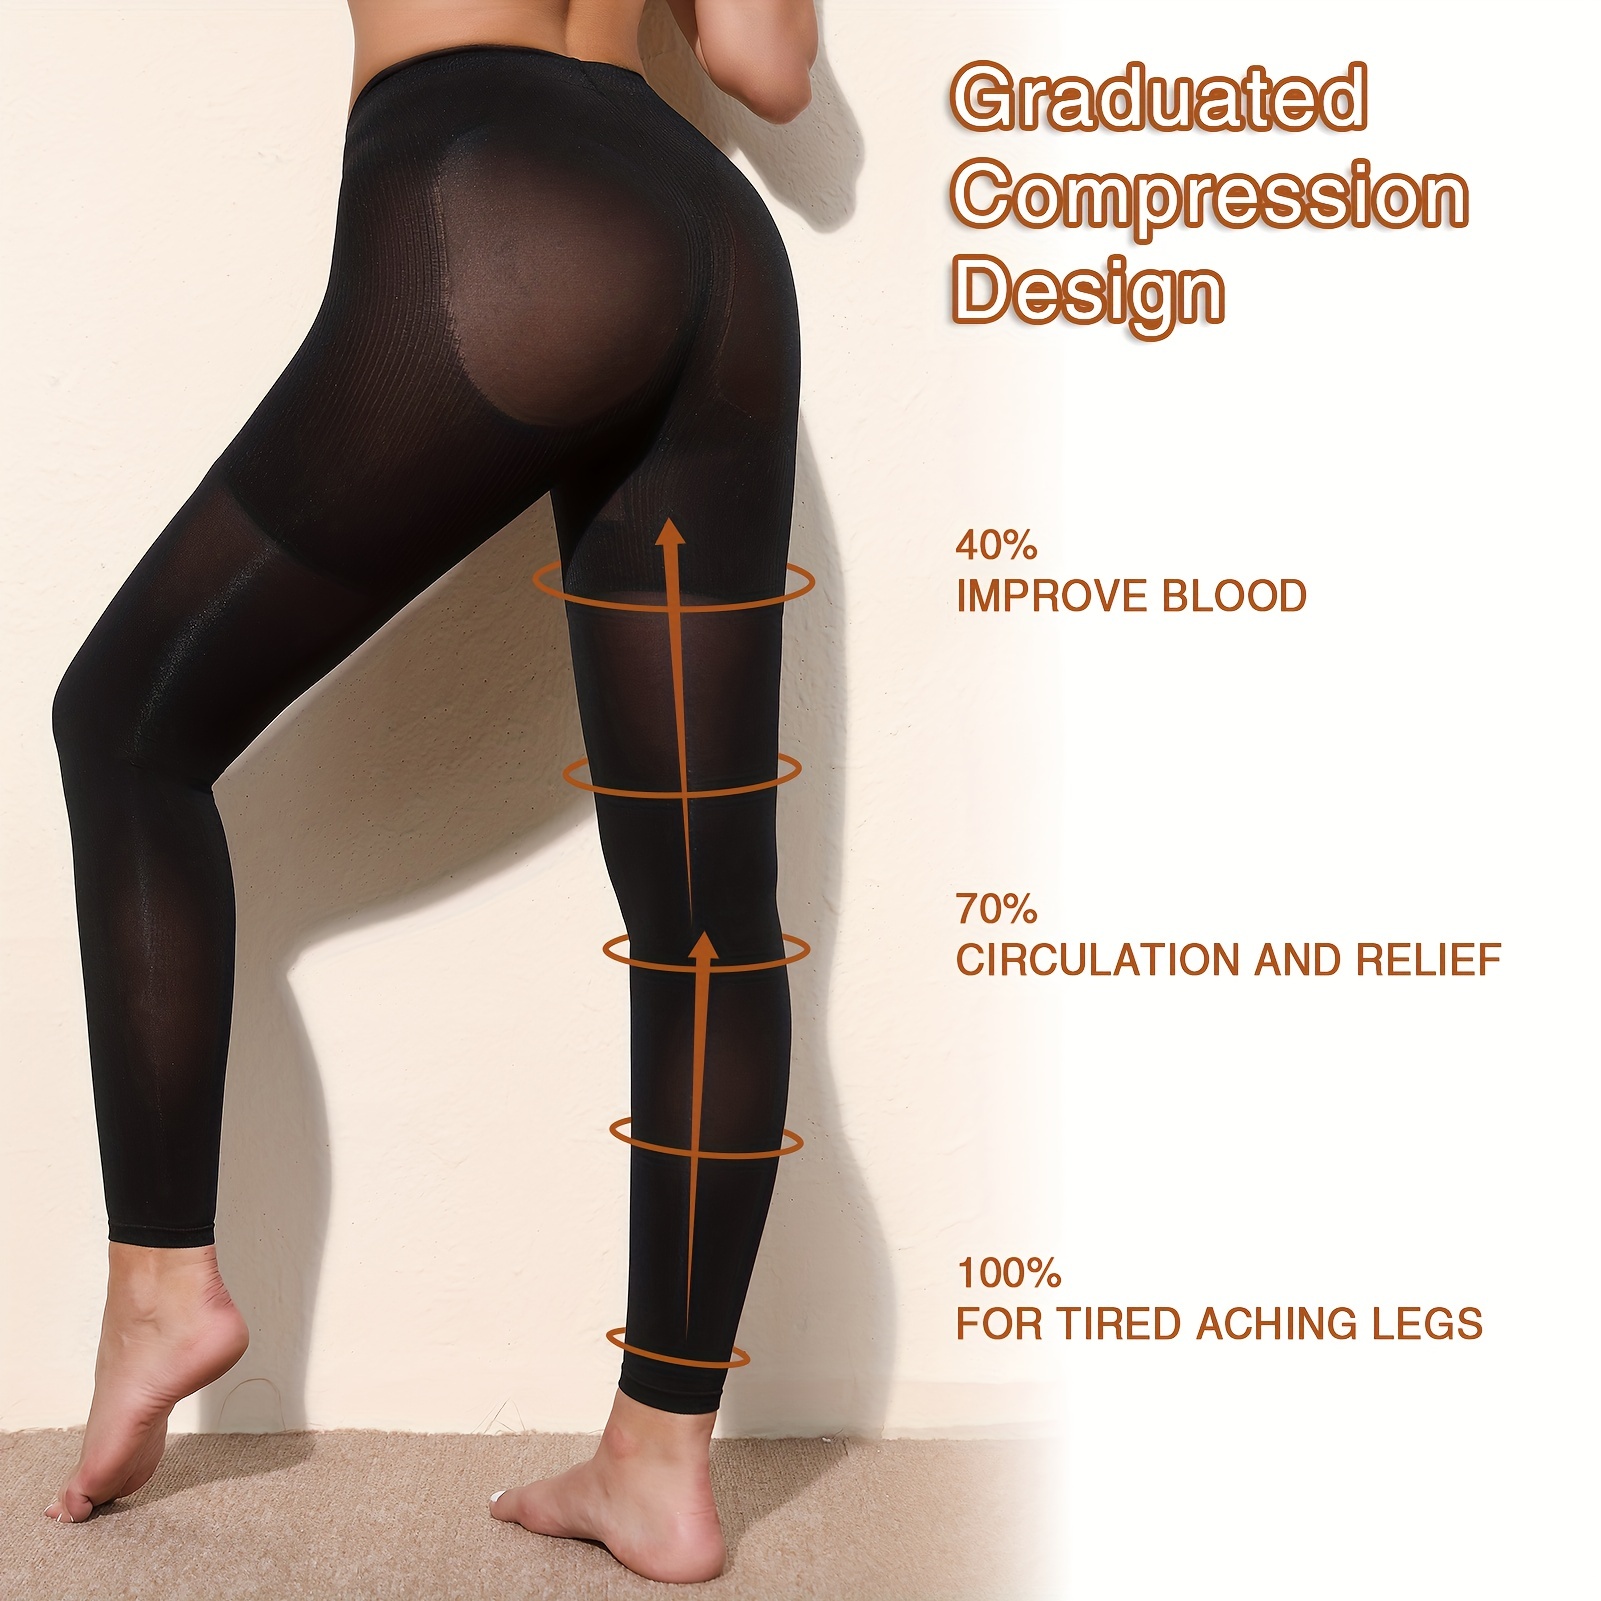 MGANG Compression Pantyhose, Footless, Waist High Compression Stockings  Opaque, 15-20 mmHg Medical Pantyhose, Firm Support Hose for Unisex, Edema, Varicose  Veins, Swelling, Nursing, Black Medium Medium 15-20mmhg Black Footless